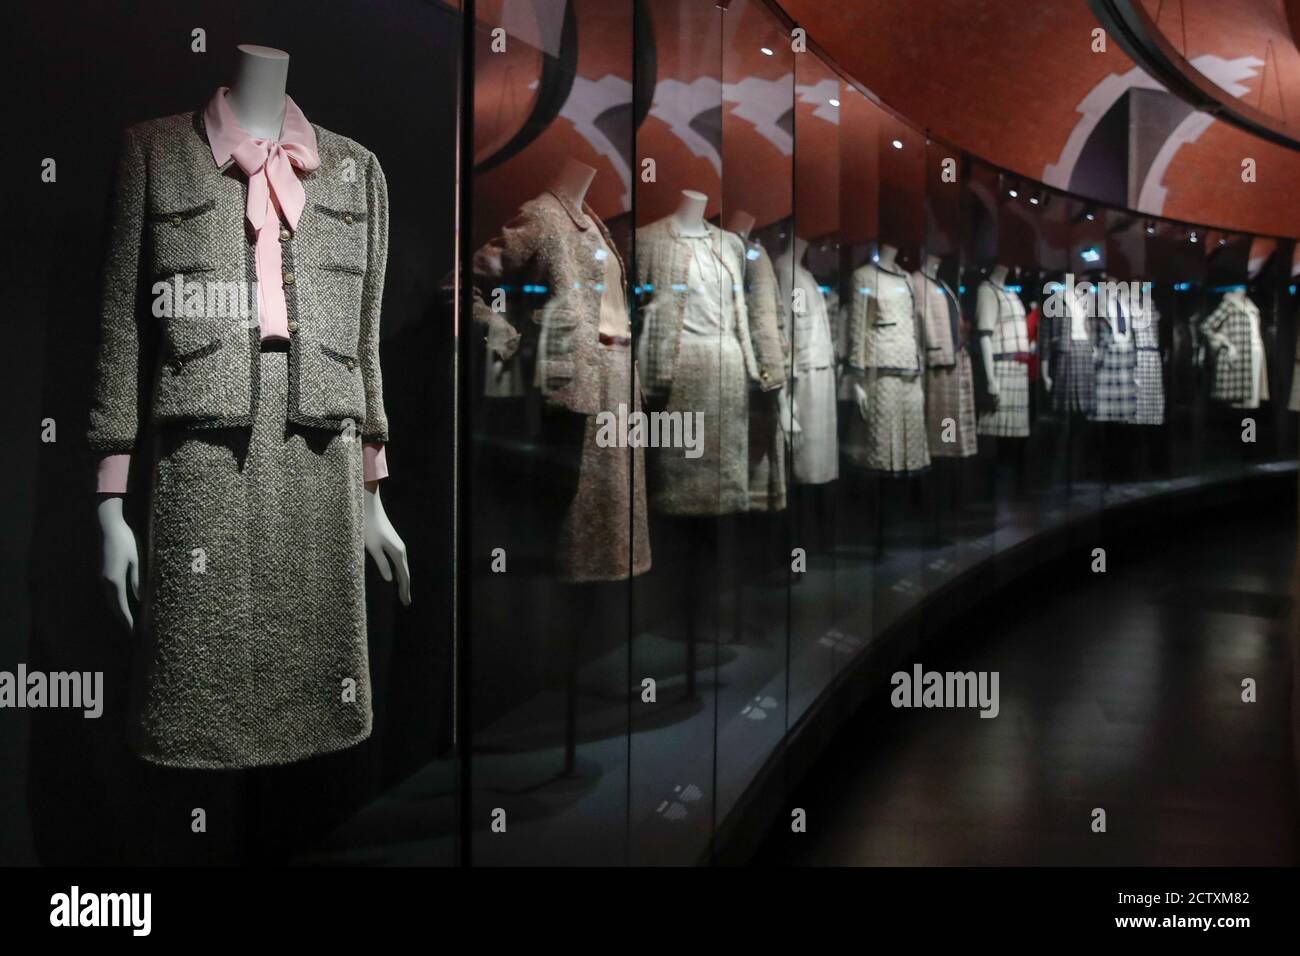 Creations of French designer Gabrielle Chanel are displayed during the  exhibition "Gabrielle Chanel, fashion manifesto" at the Galliera Palais  fashion museum in Paris, France, September 25, 2020. REUTERS/Gonzalo  Fuentes Stock Photo - Alamy